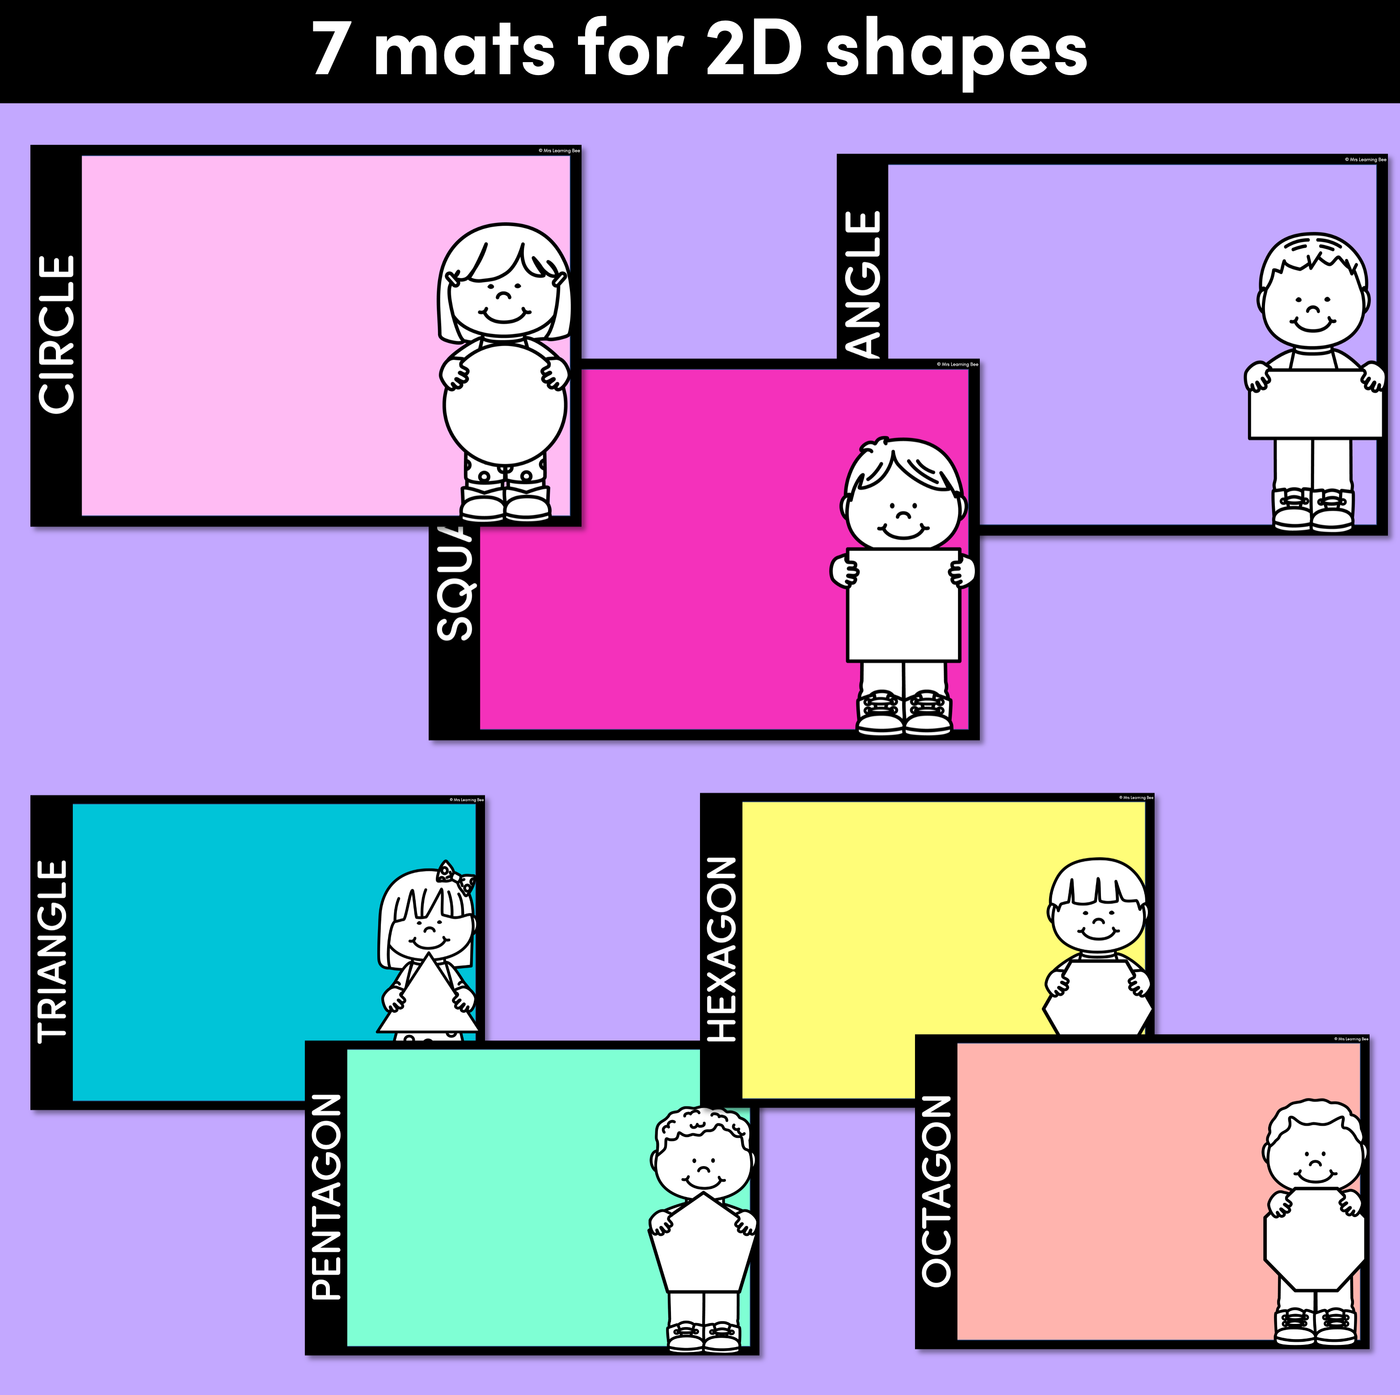 2D Shapes in Real Life - Sorting Mats